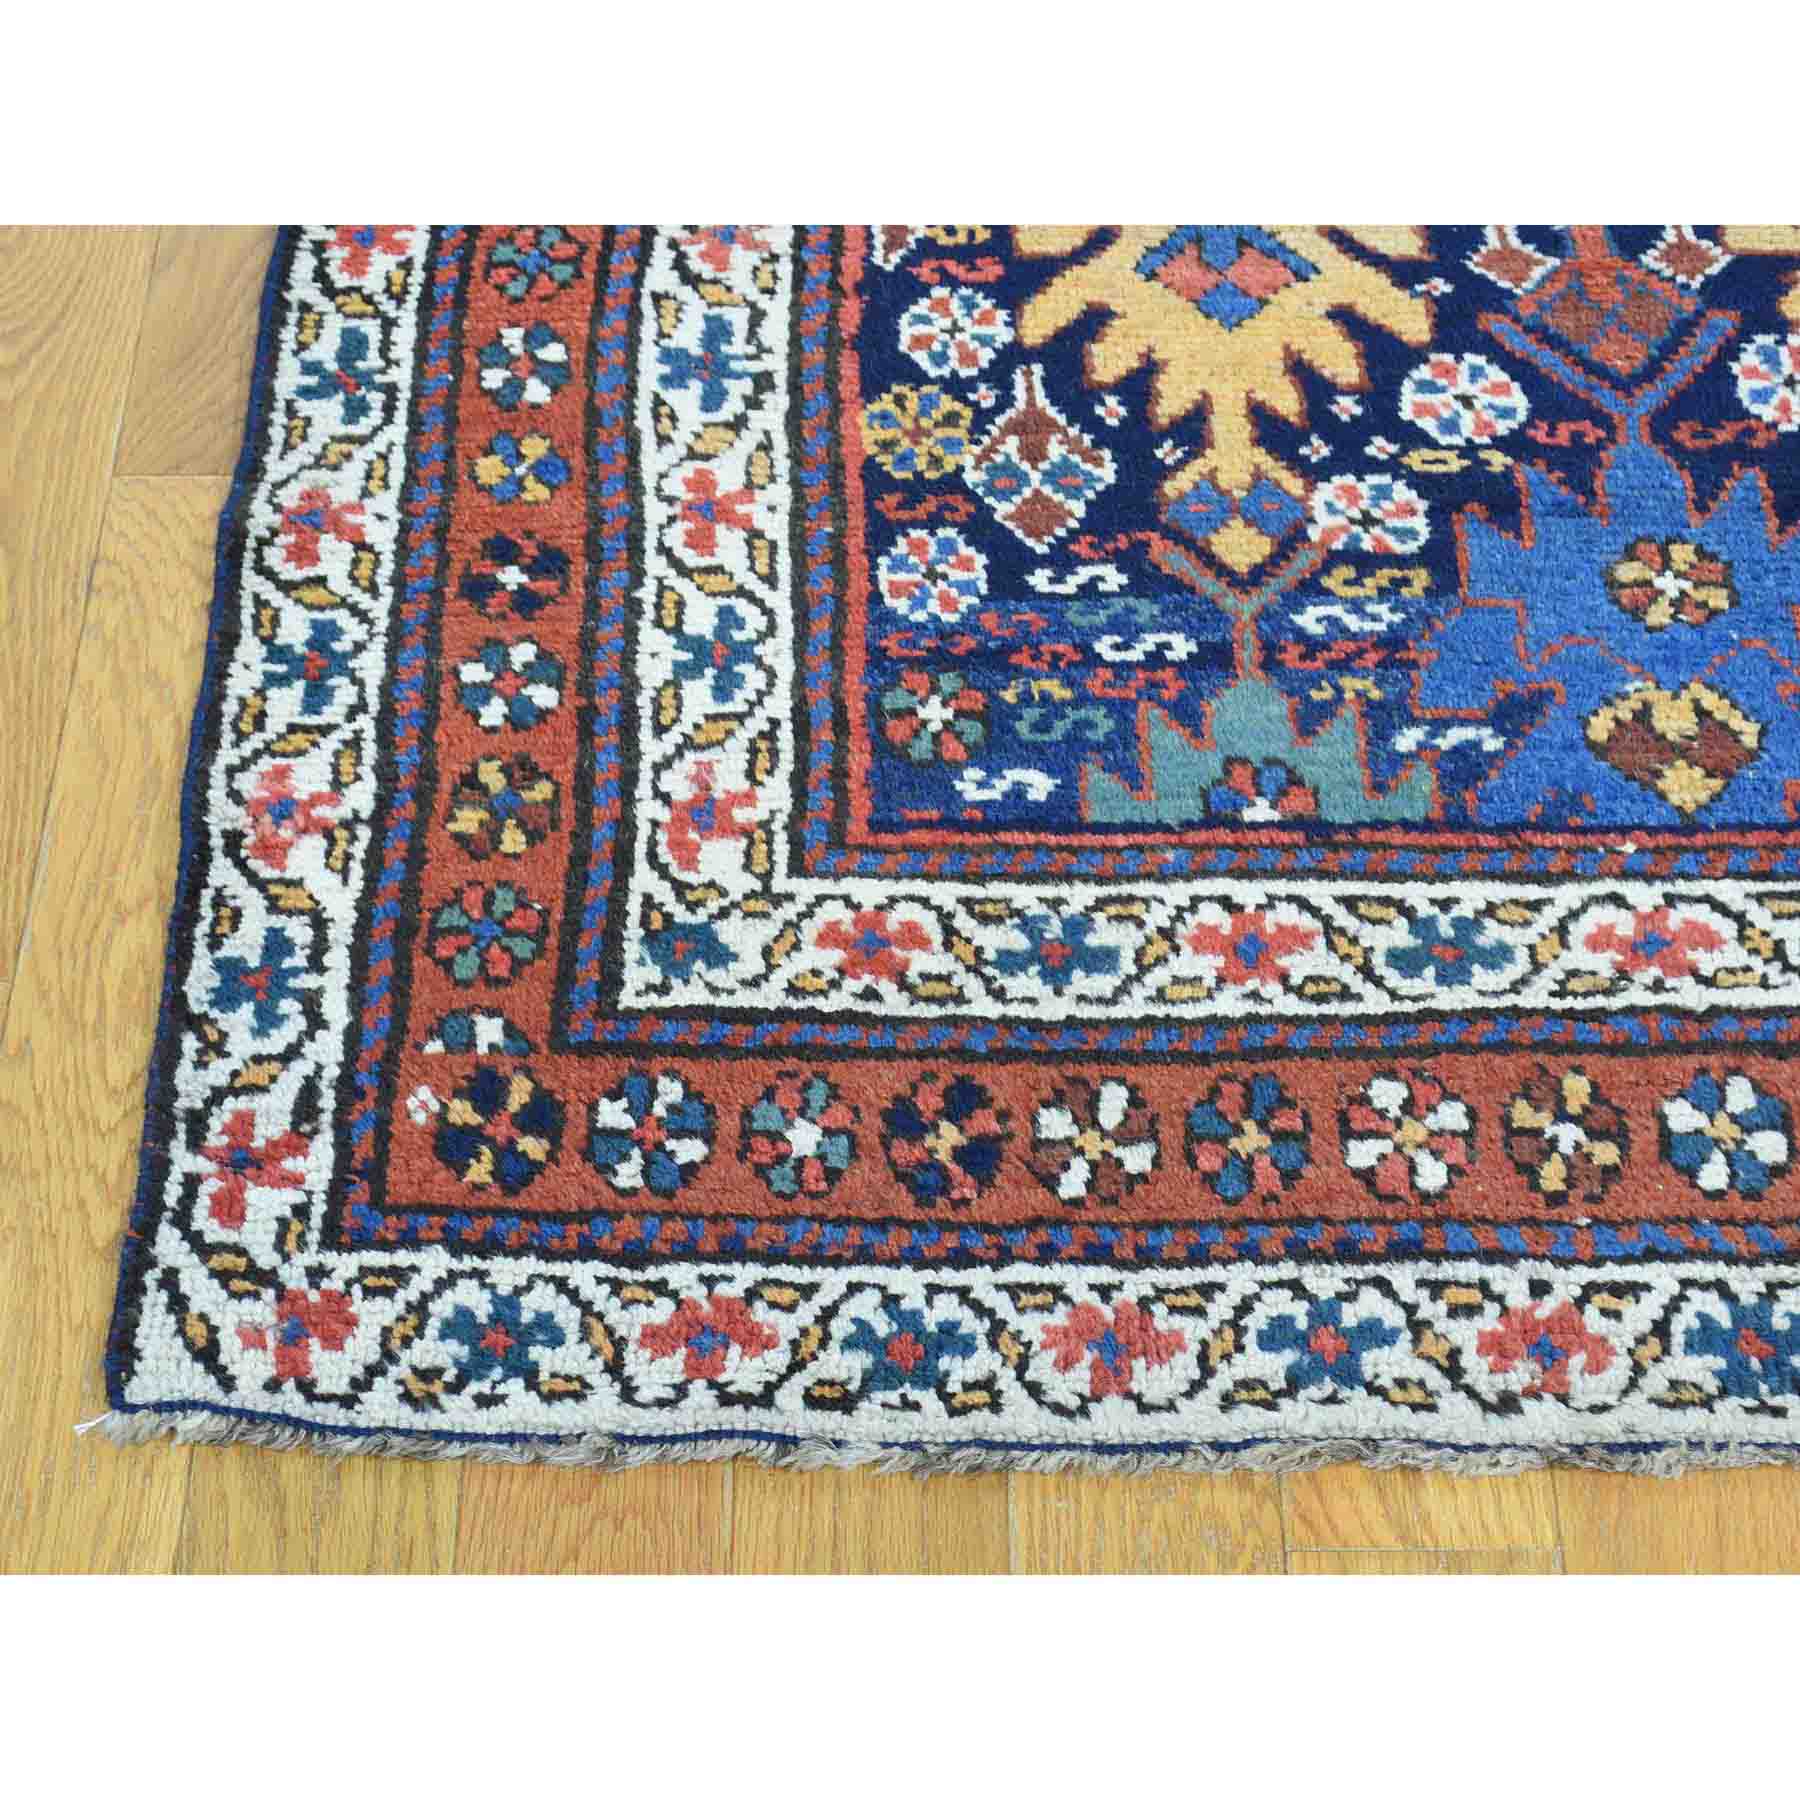 Antique-Hand-Knotted-Rug-181335